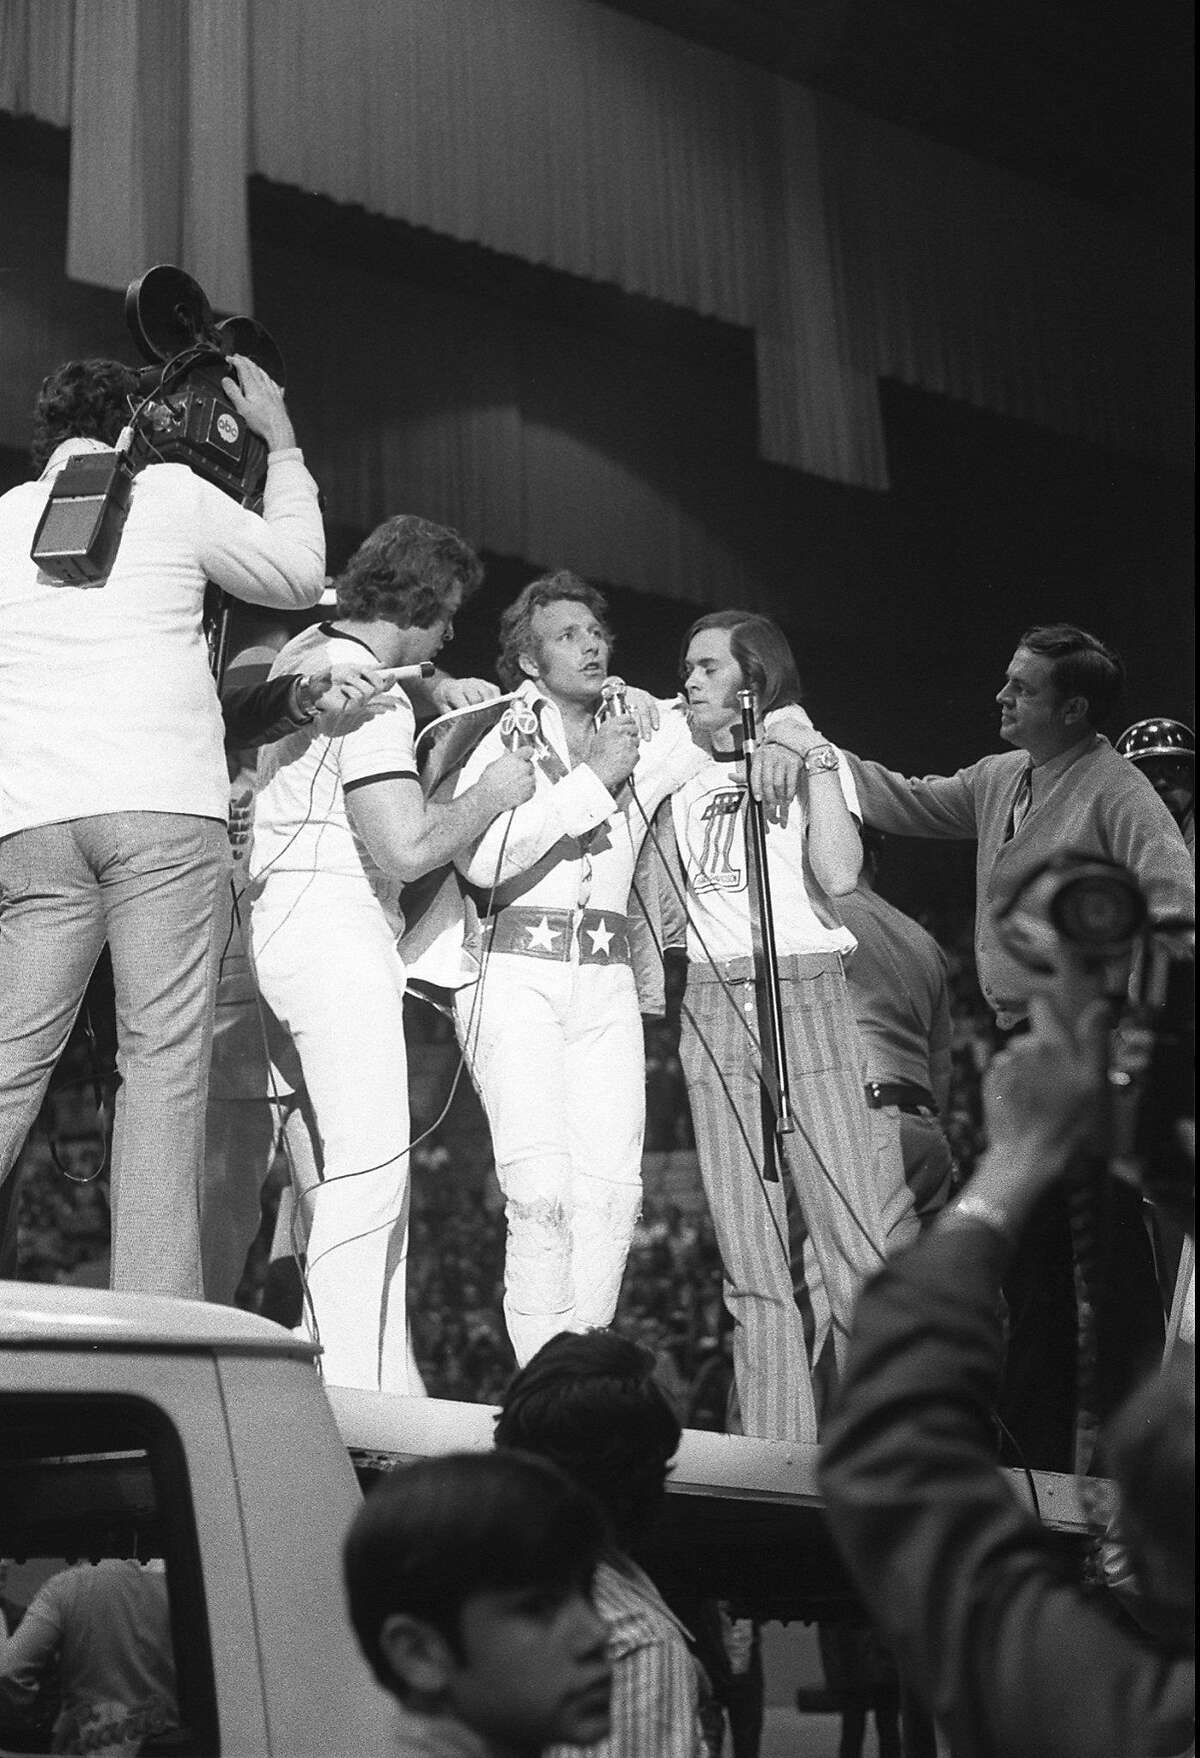 Evel Knievel addresses the crowd at the Cow Palace after making his record jump.